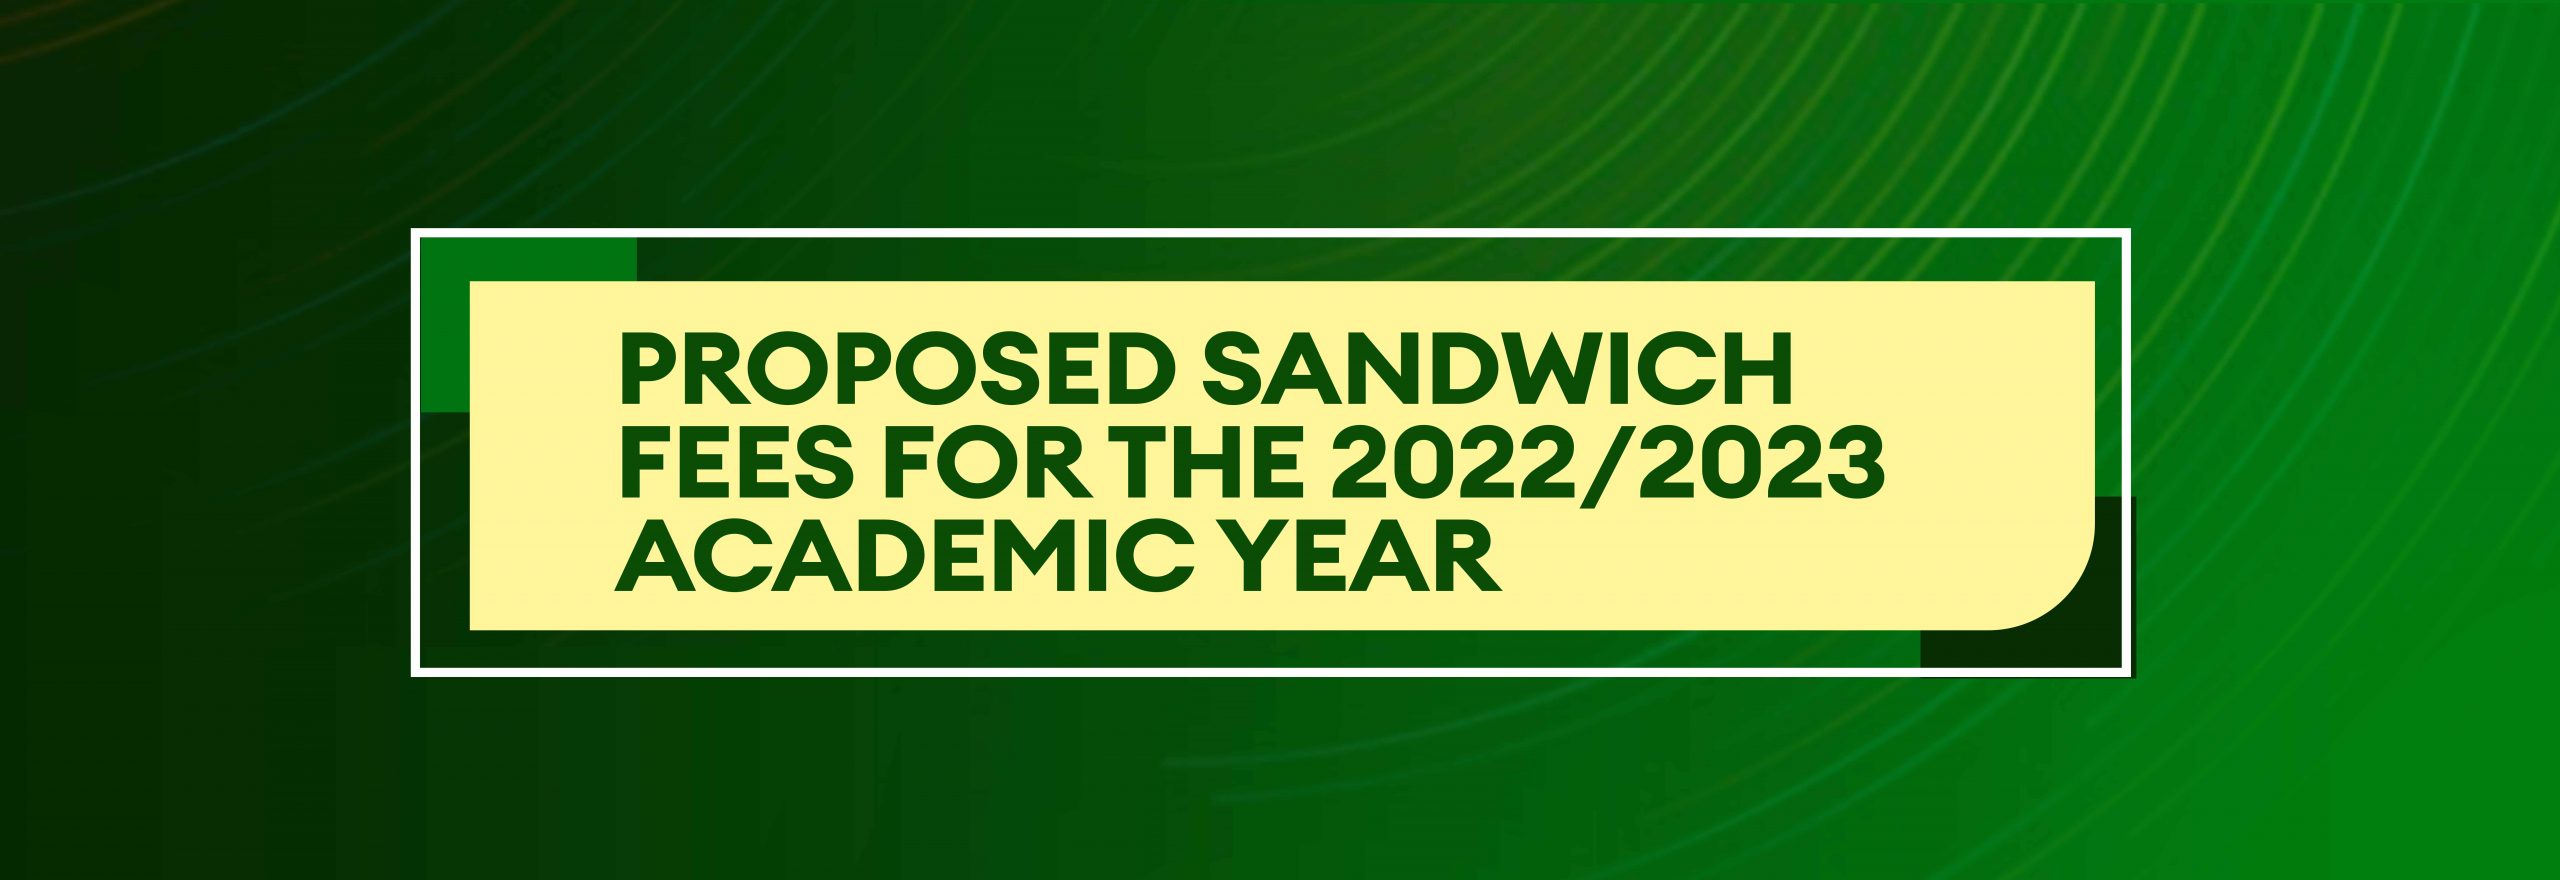 You are currently viewing Proposed Sandwich Fees for the 2022/2023 Academic Year